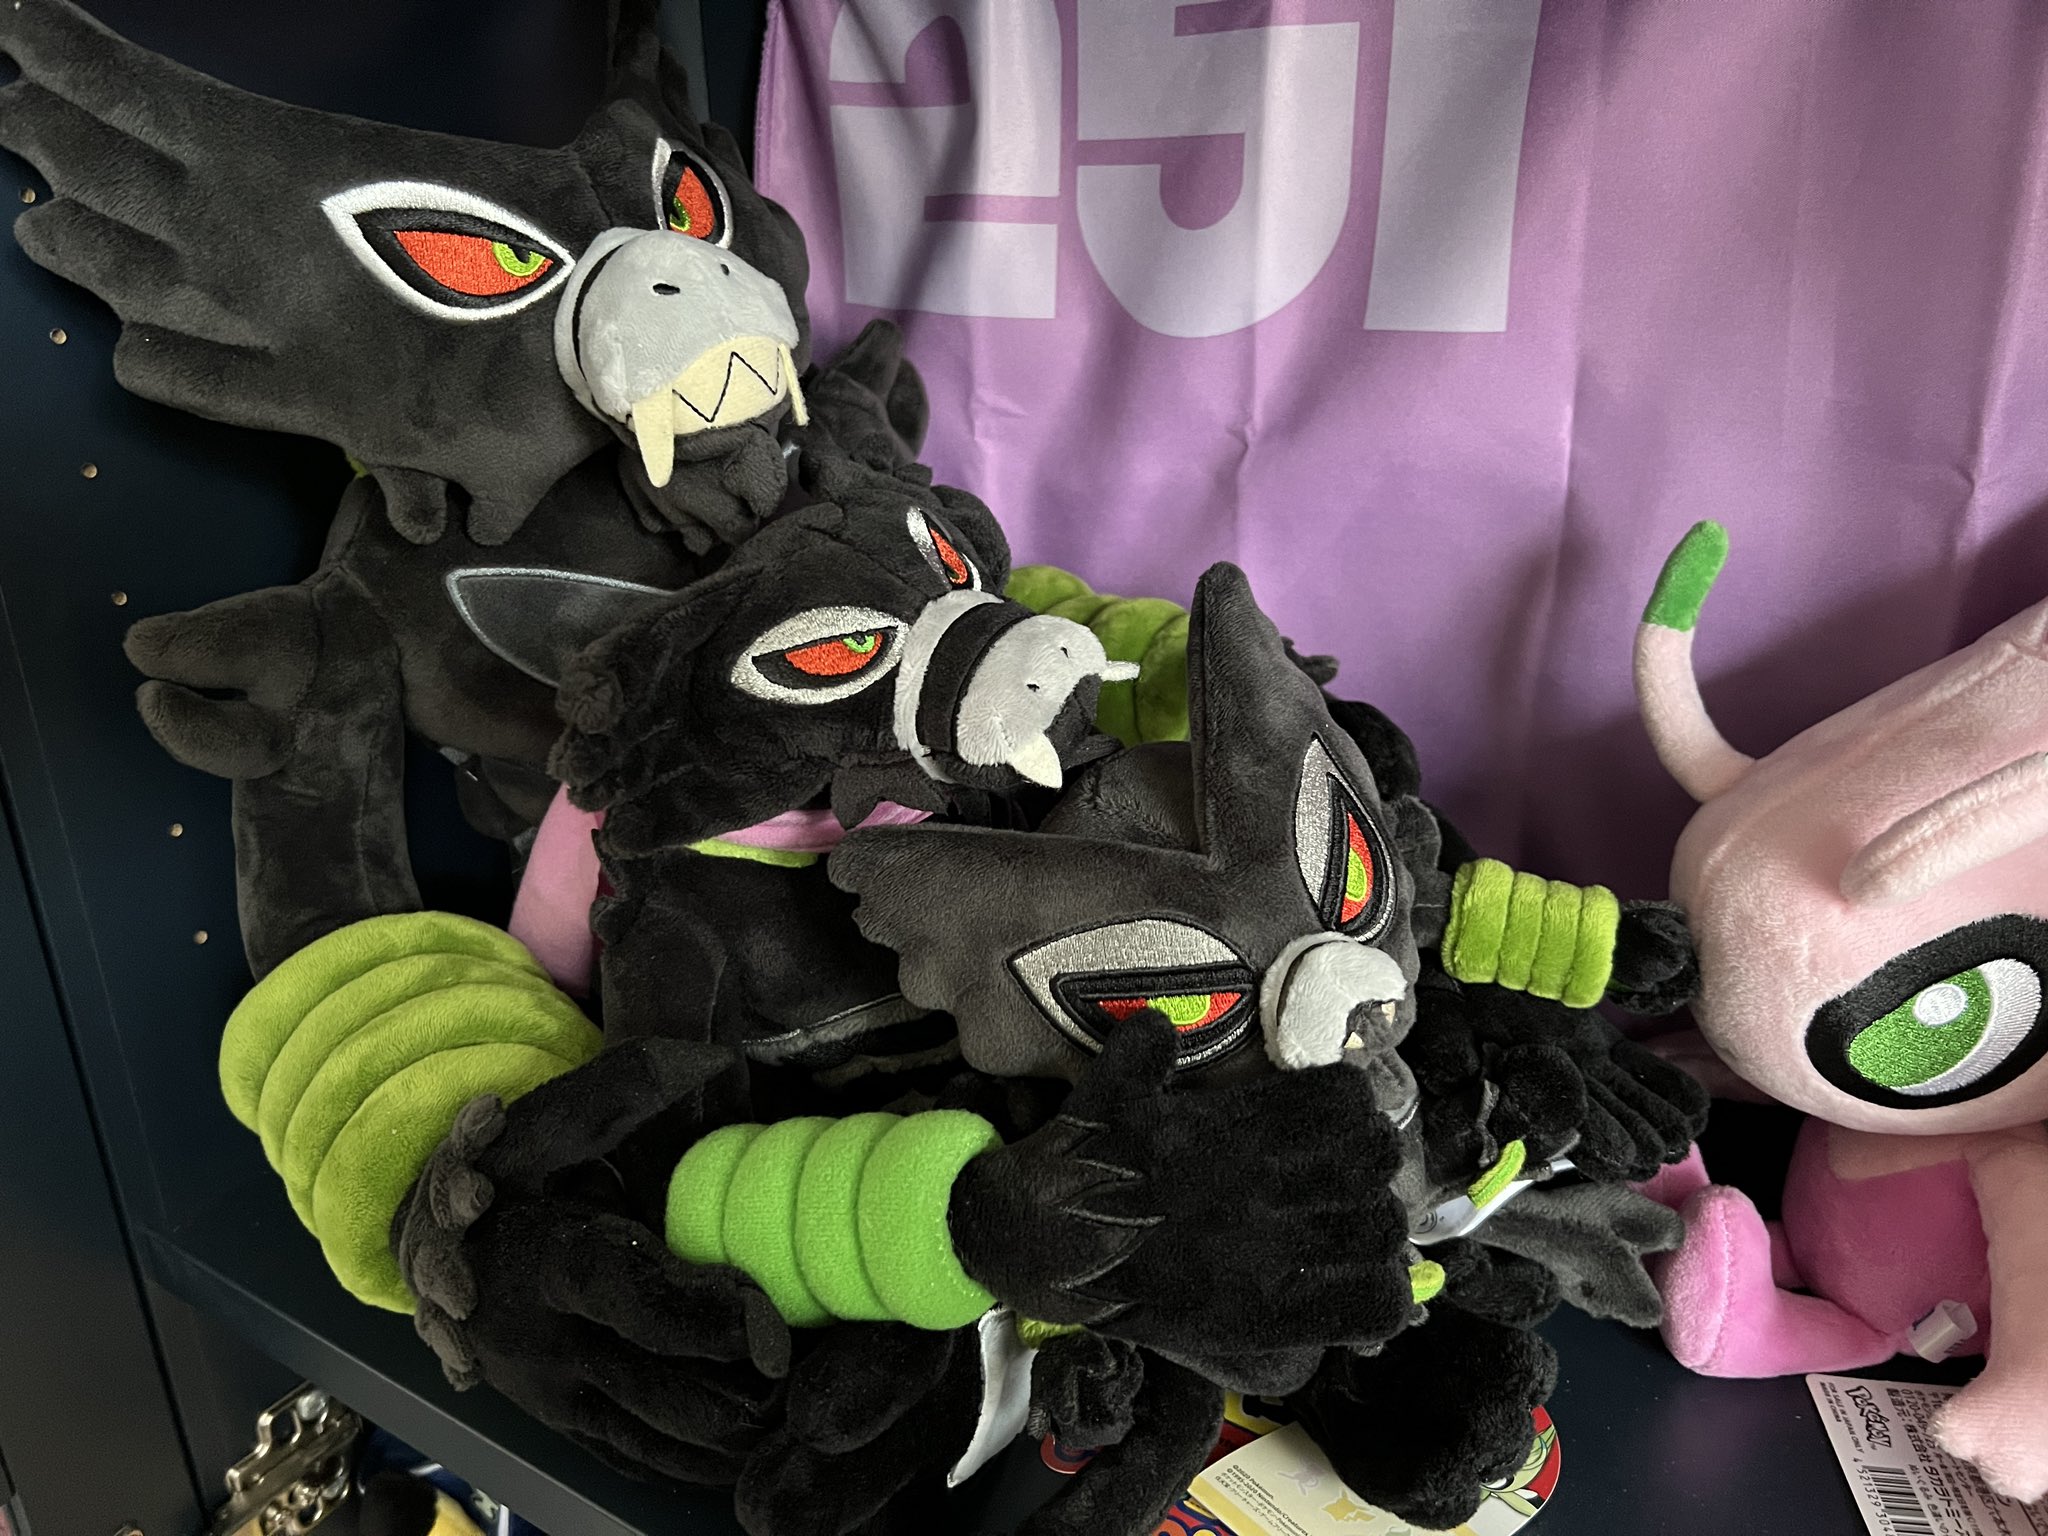 Joe Merrick on X: Oh and the Ultra Beast plush are available on